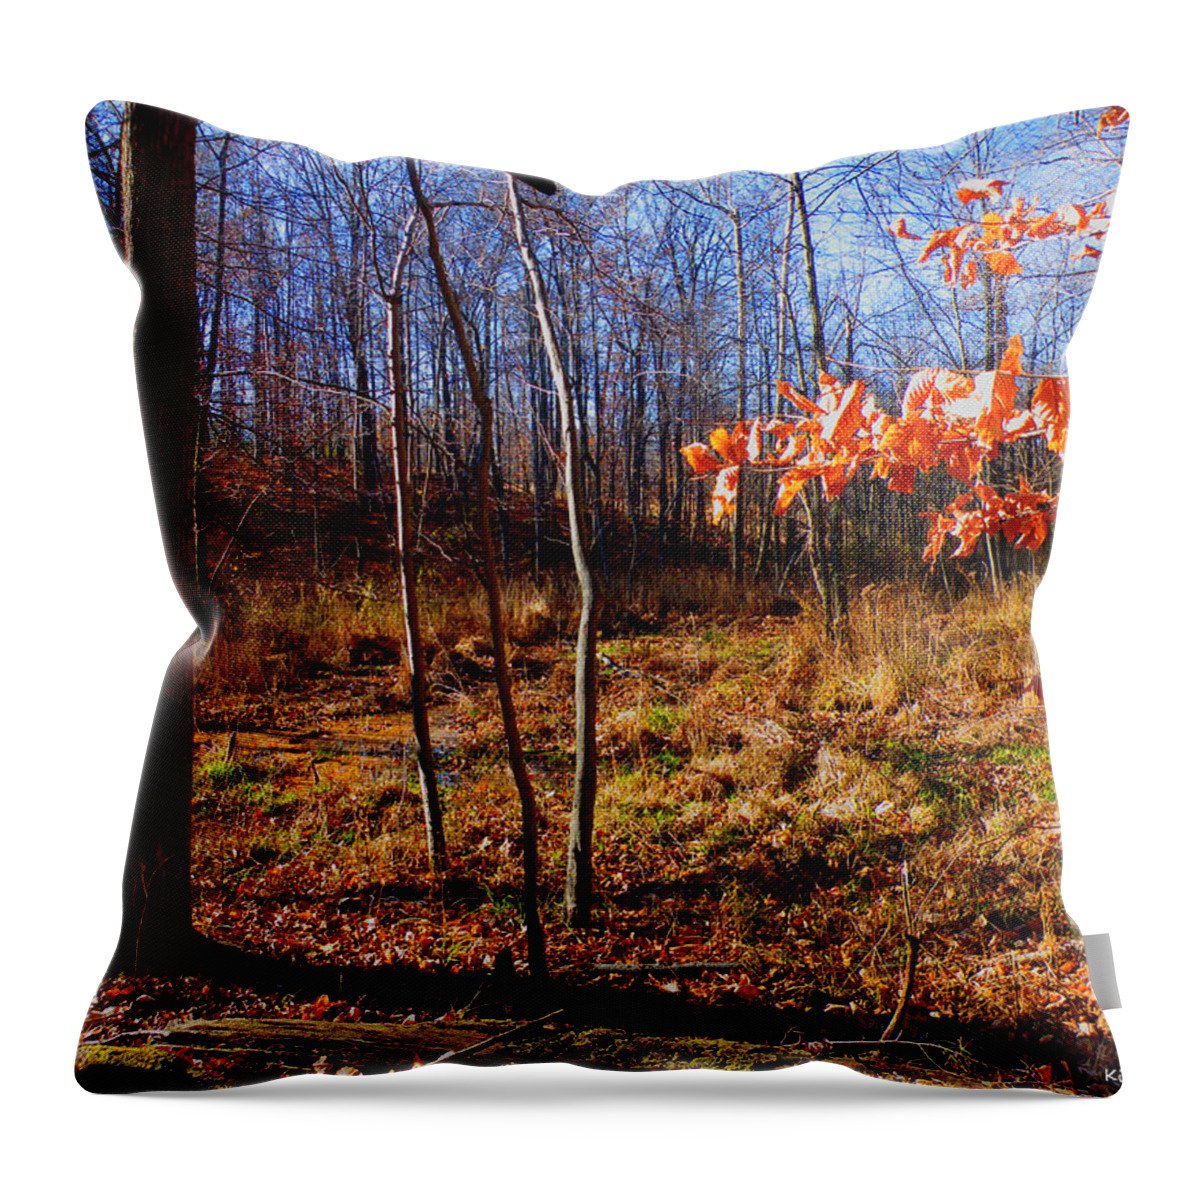 Autumn Throw Pillow featuring the photograph Autumn's End by Kimmary MacLean